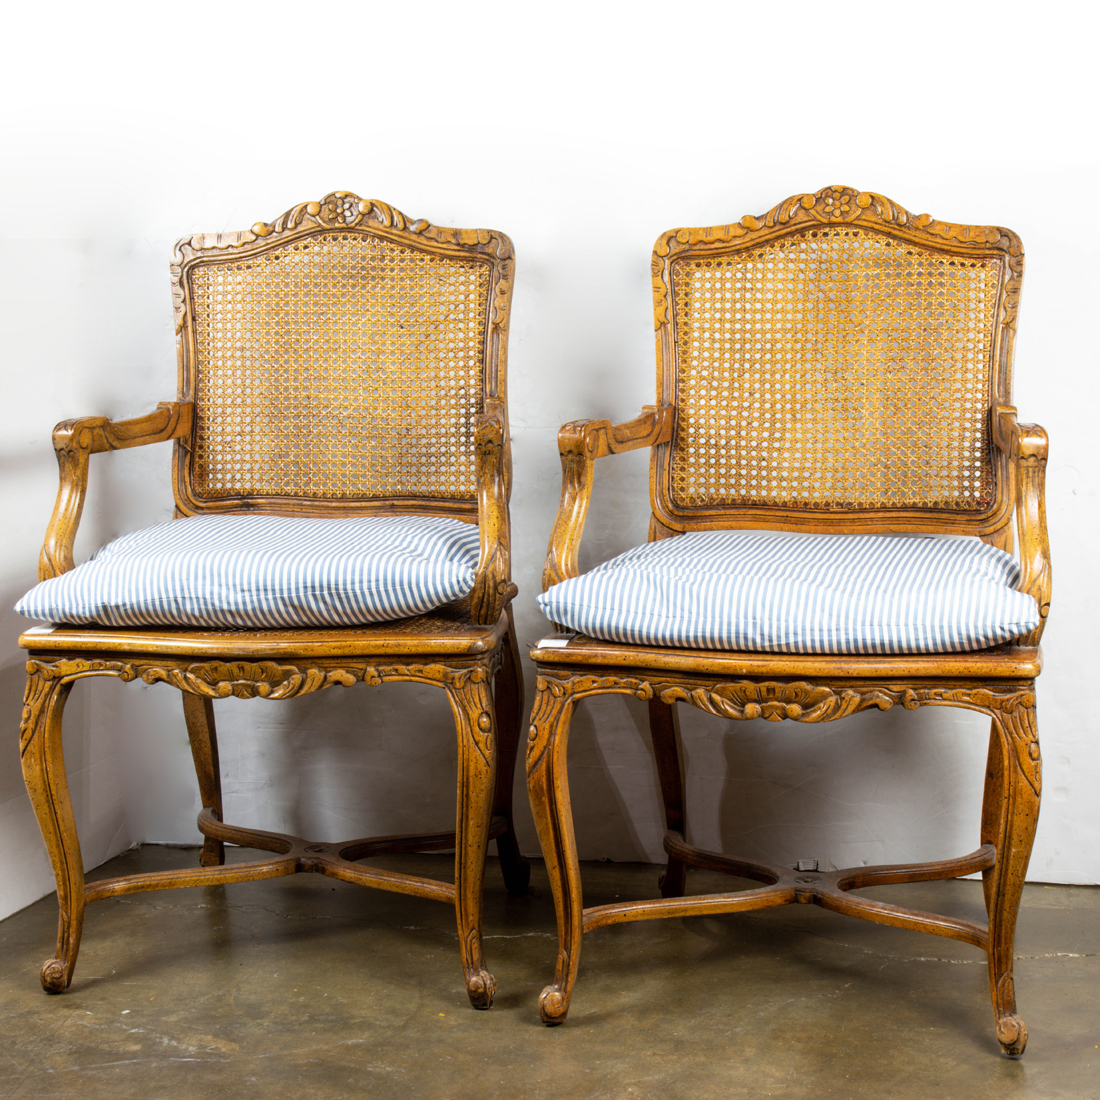 PAIR OF LOUIS XV STYLE CHAIRS Pair